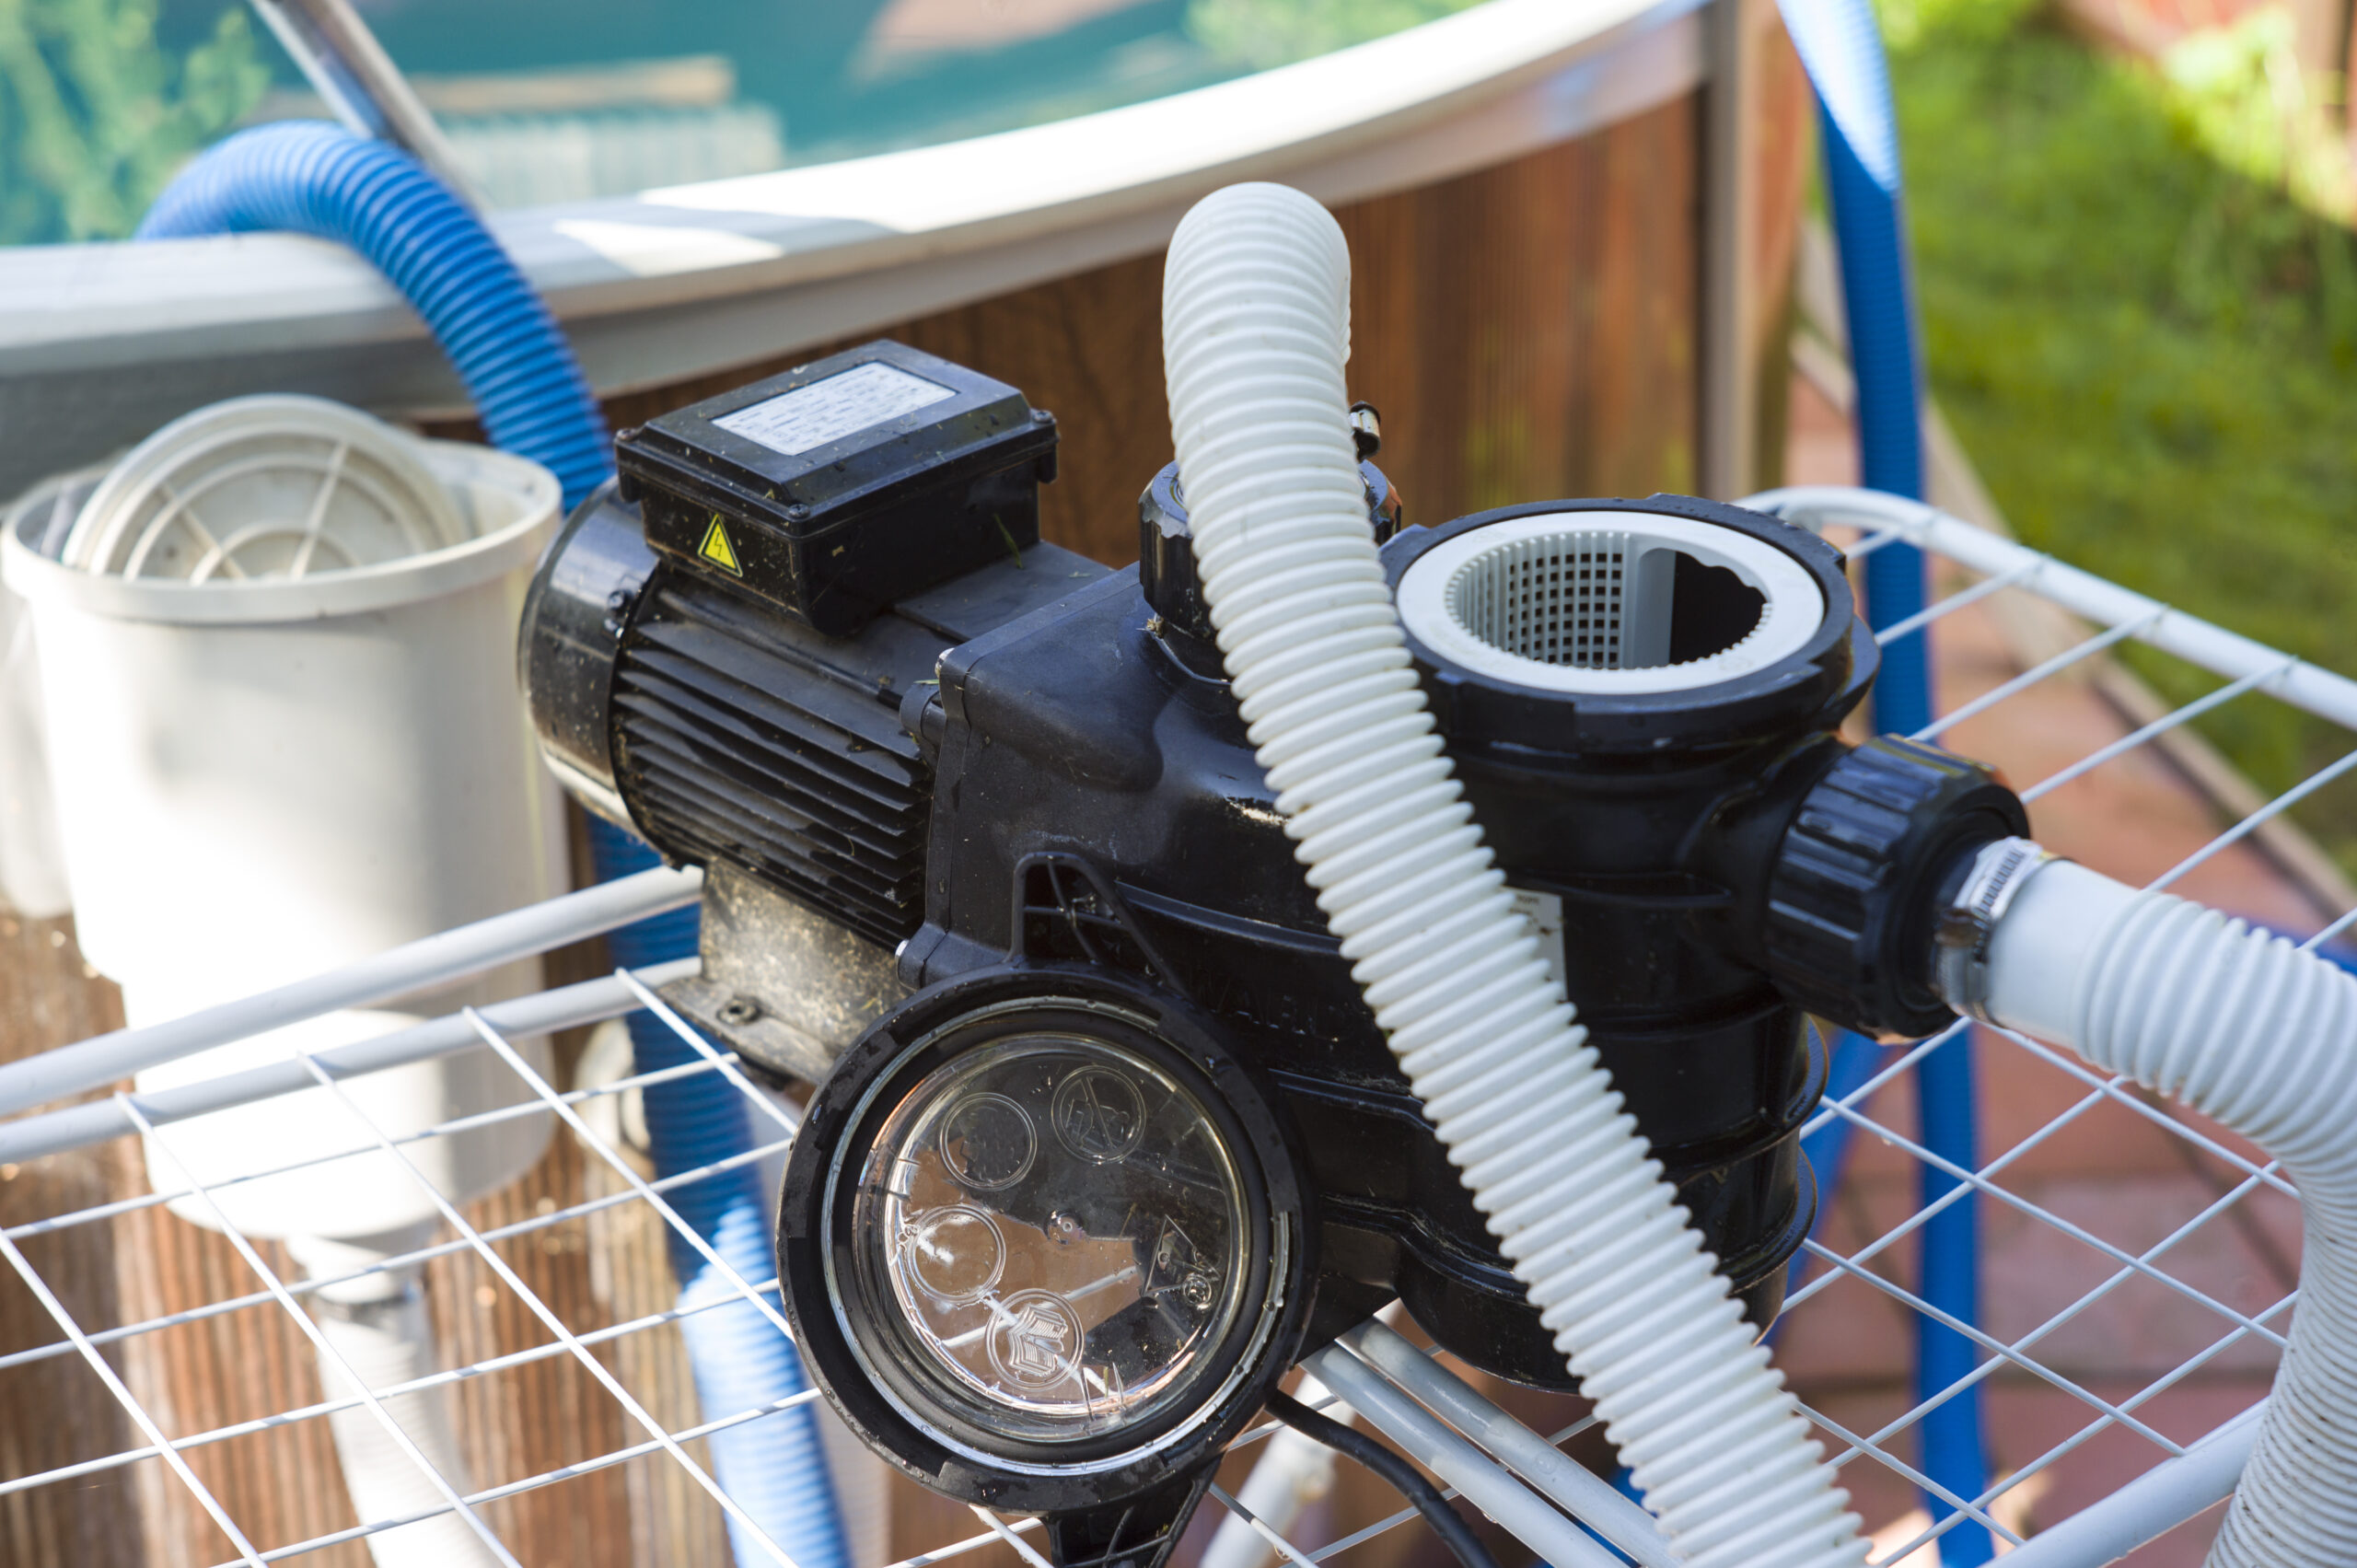 A pool pump, a vital component for circulating and filtering water in a swimming pool